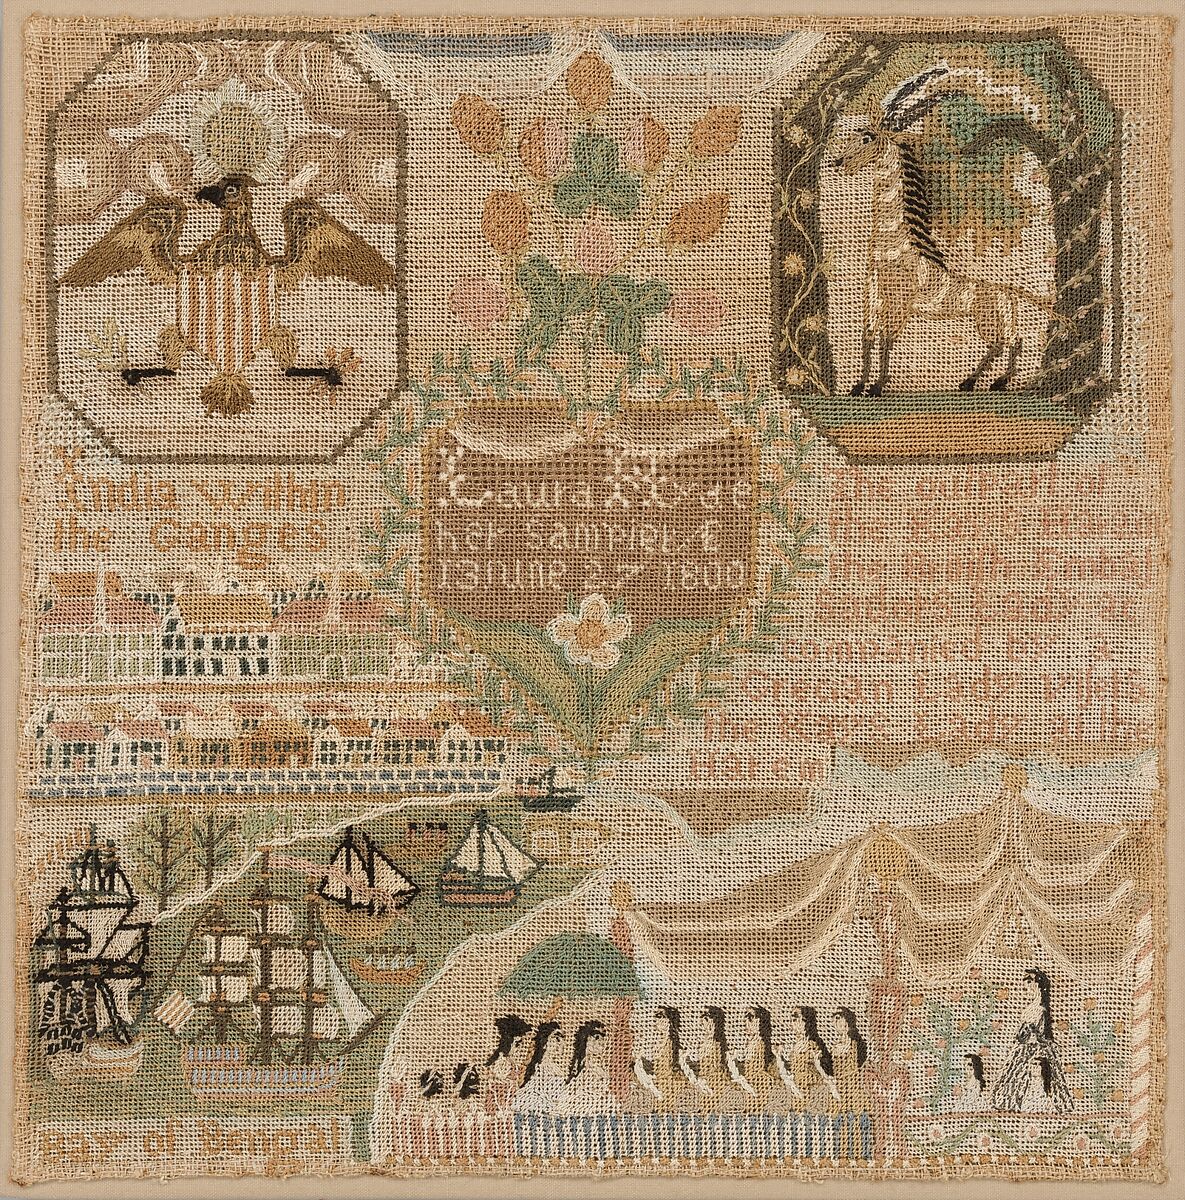 Embroidered Sampler, Laura Hyde (born 1787), Silk on linen, embroidered, American 